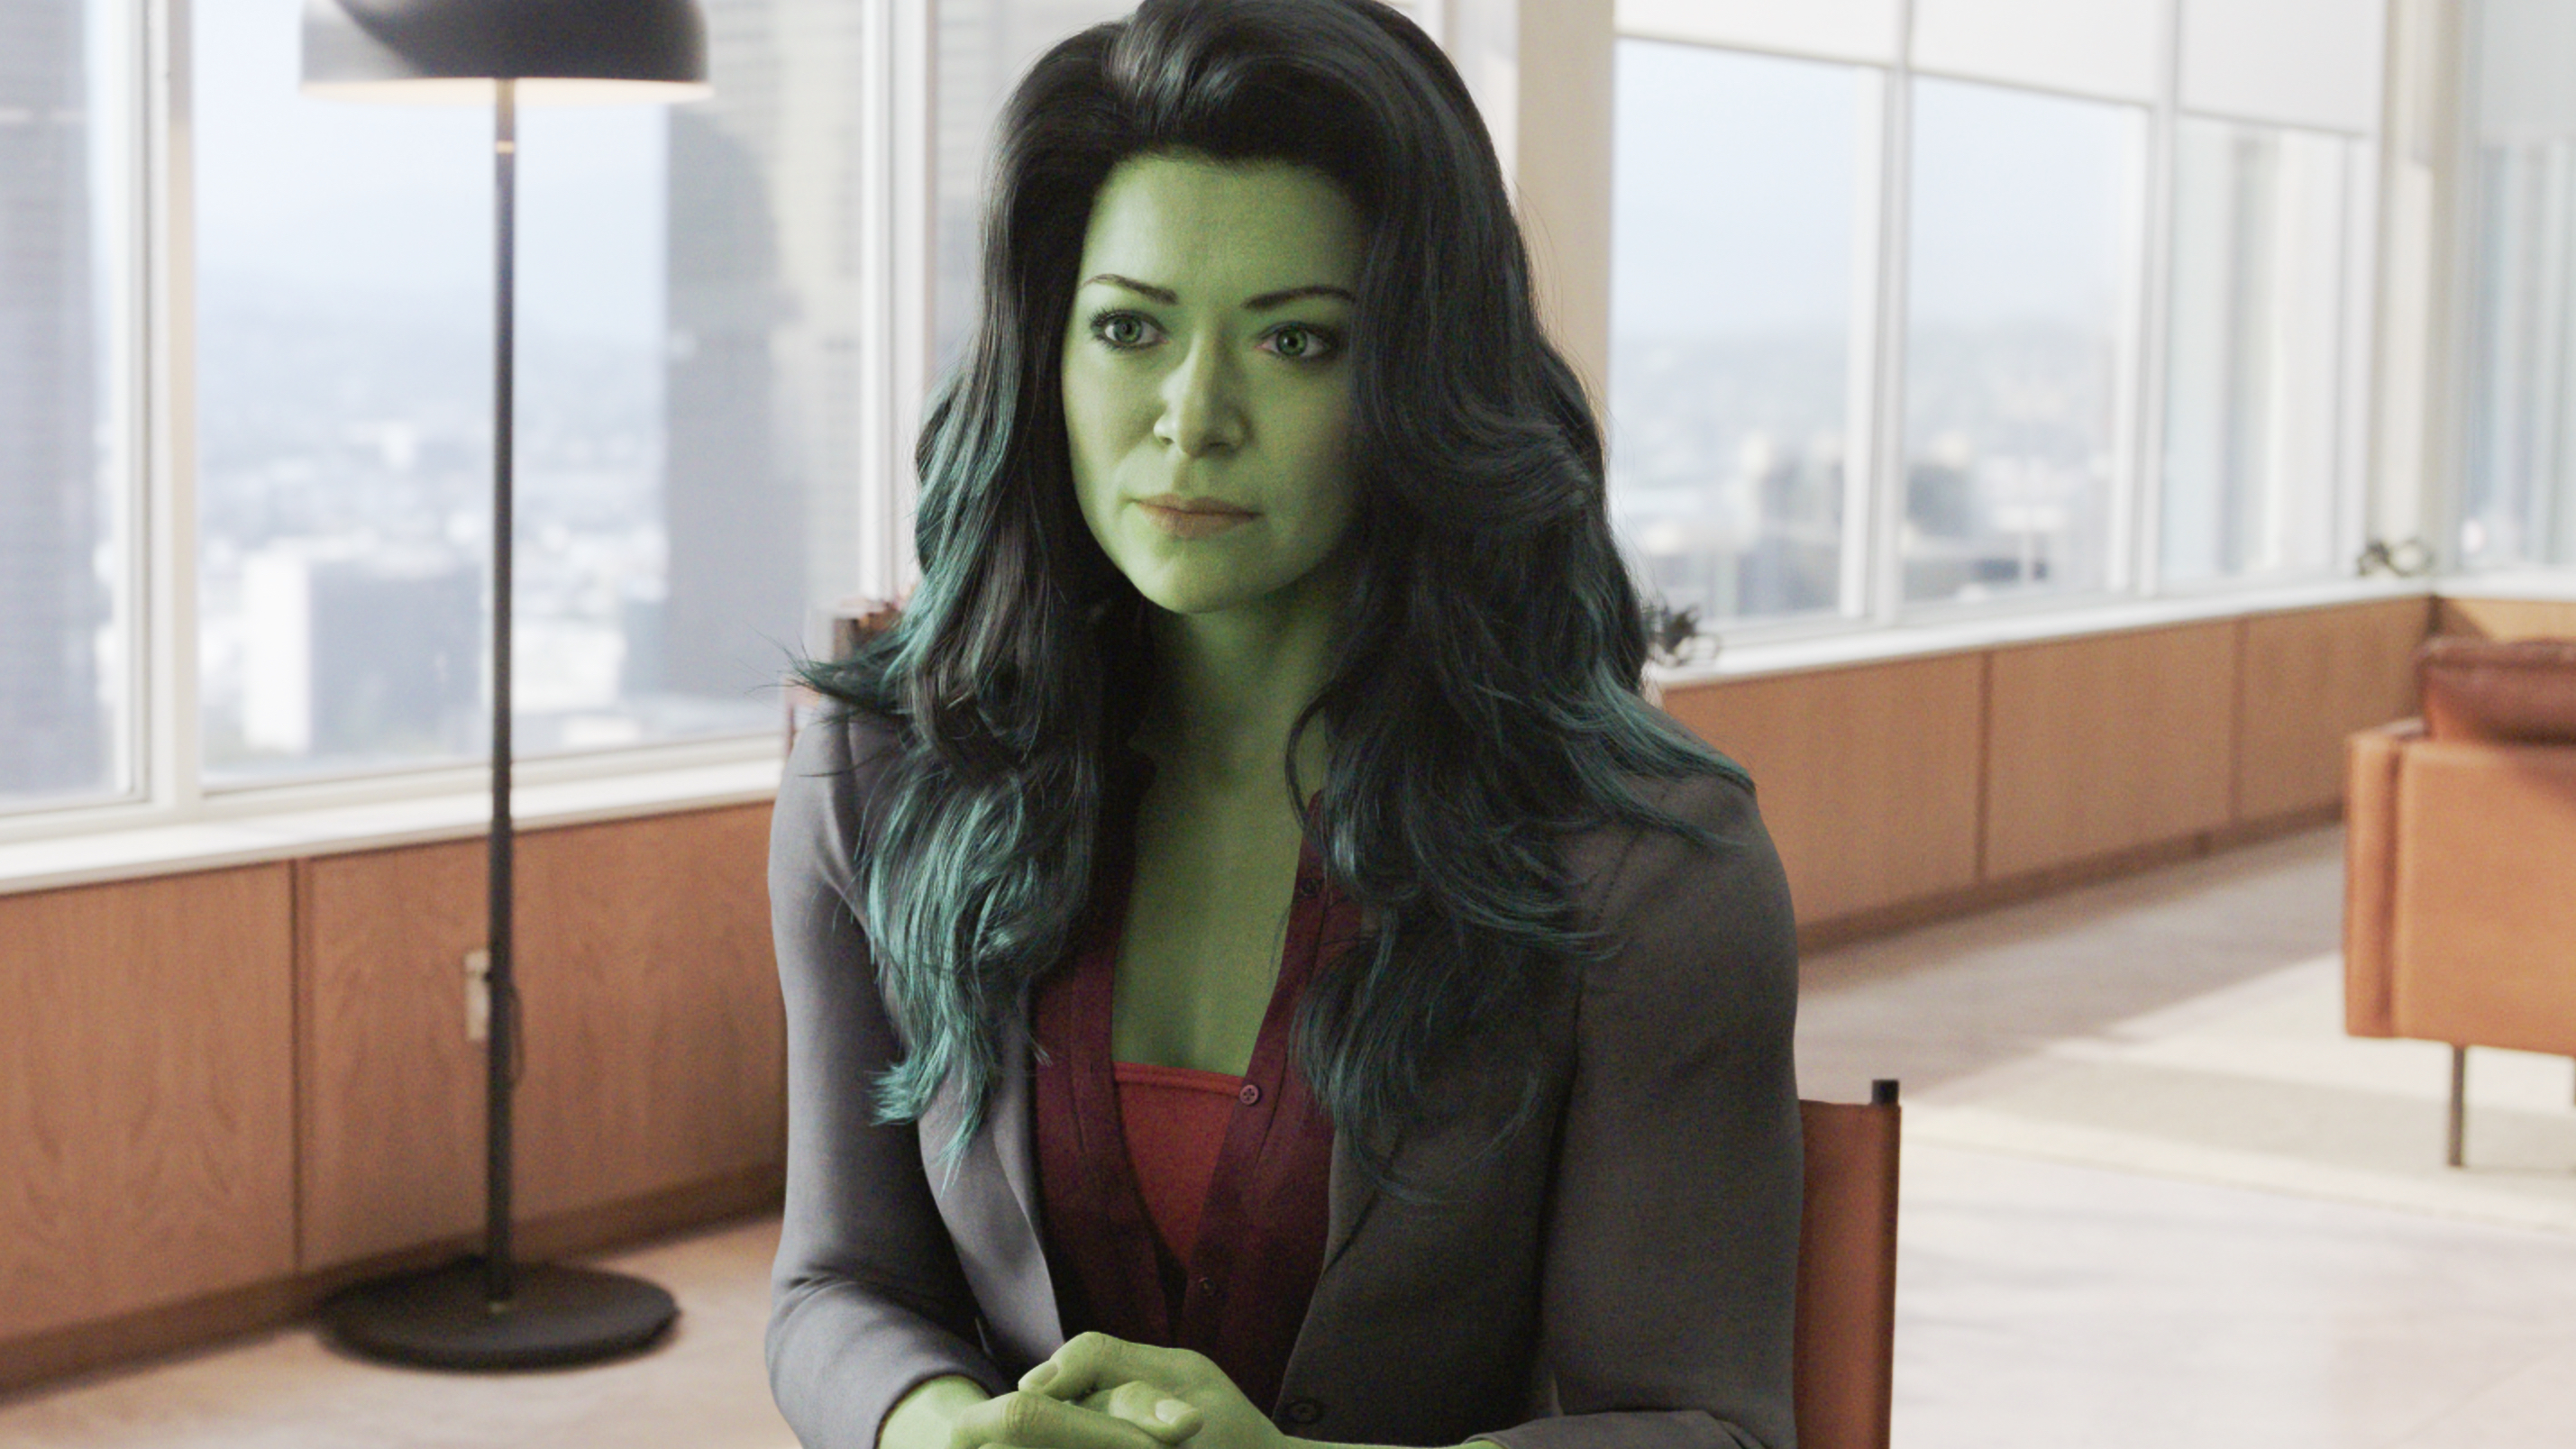 Rotten Tomatoes - The official synopsis for She-Hulk